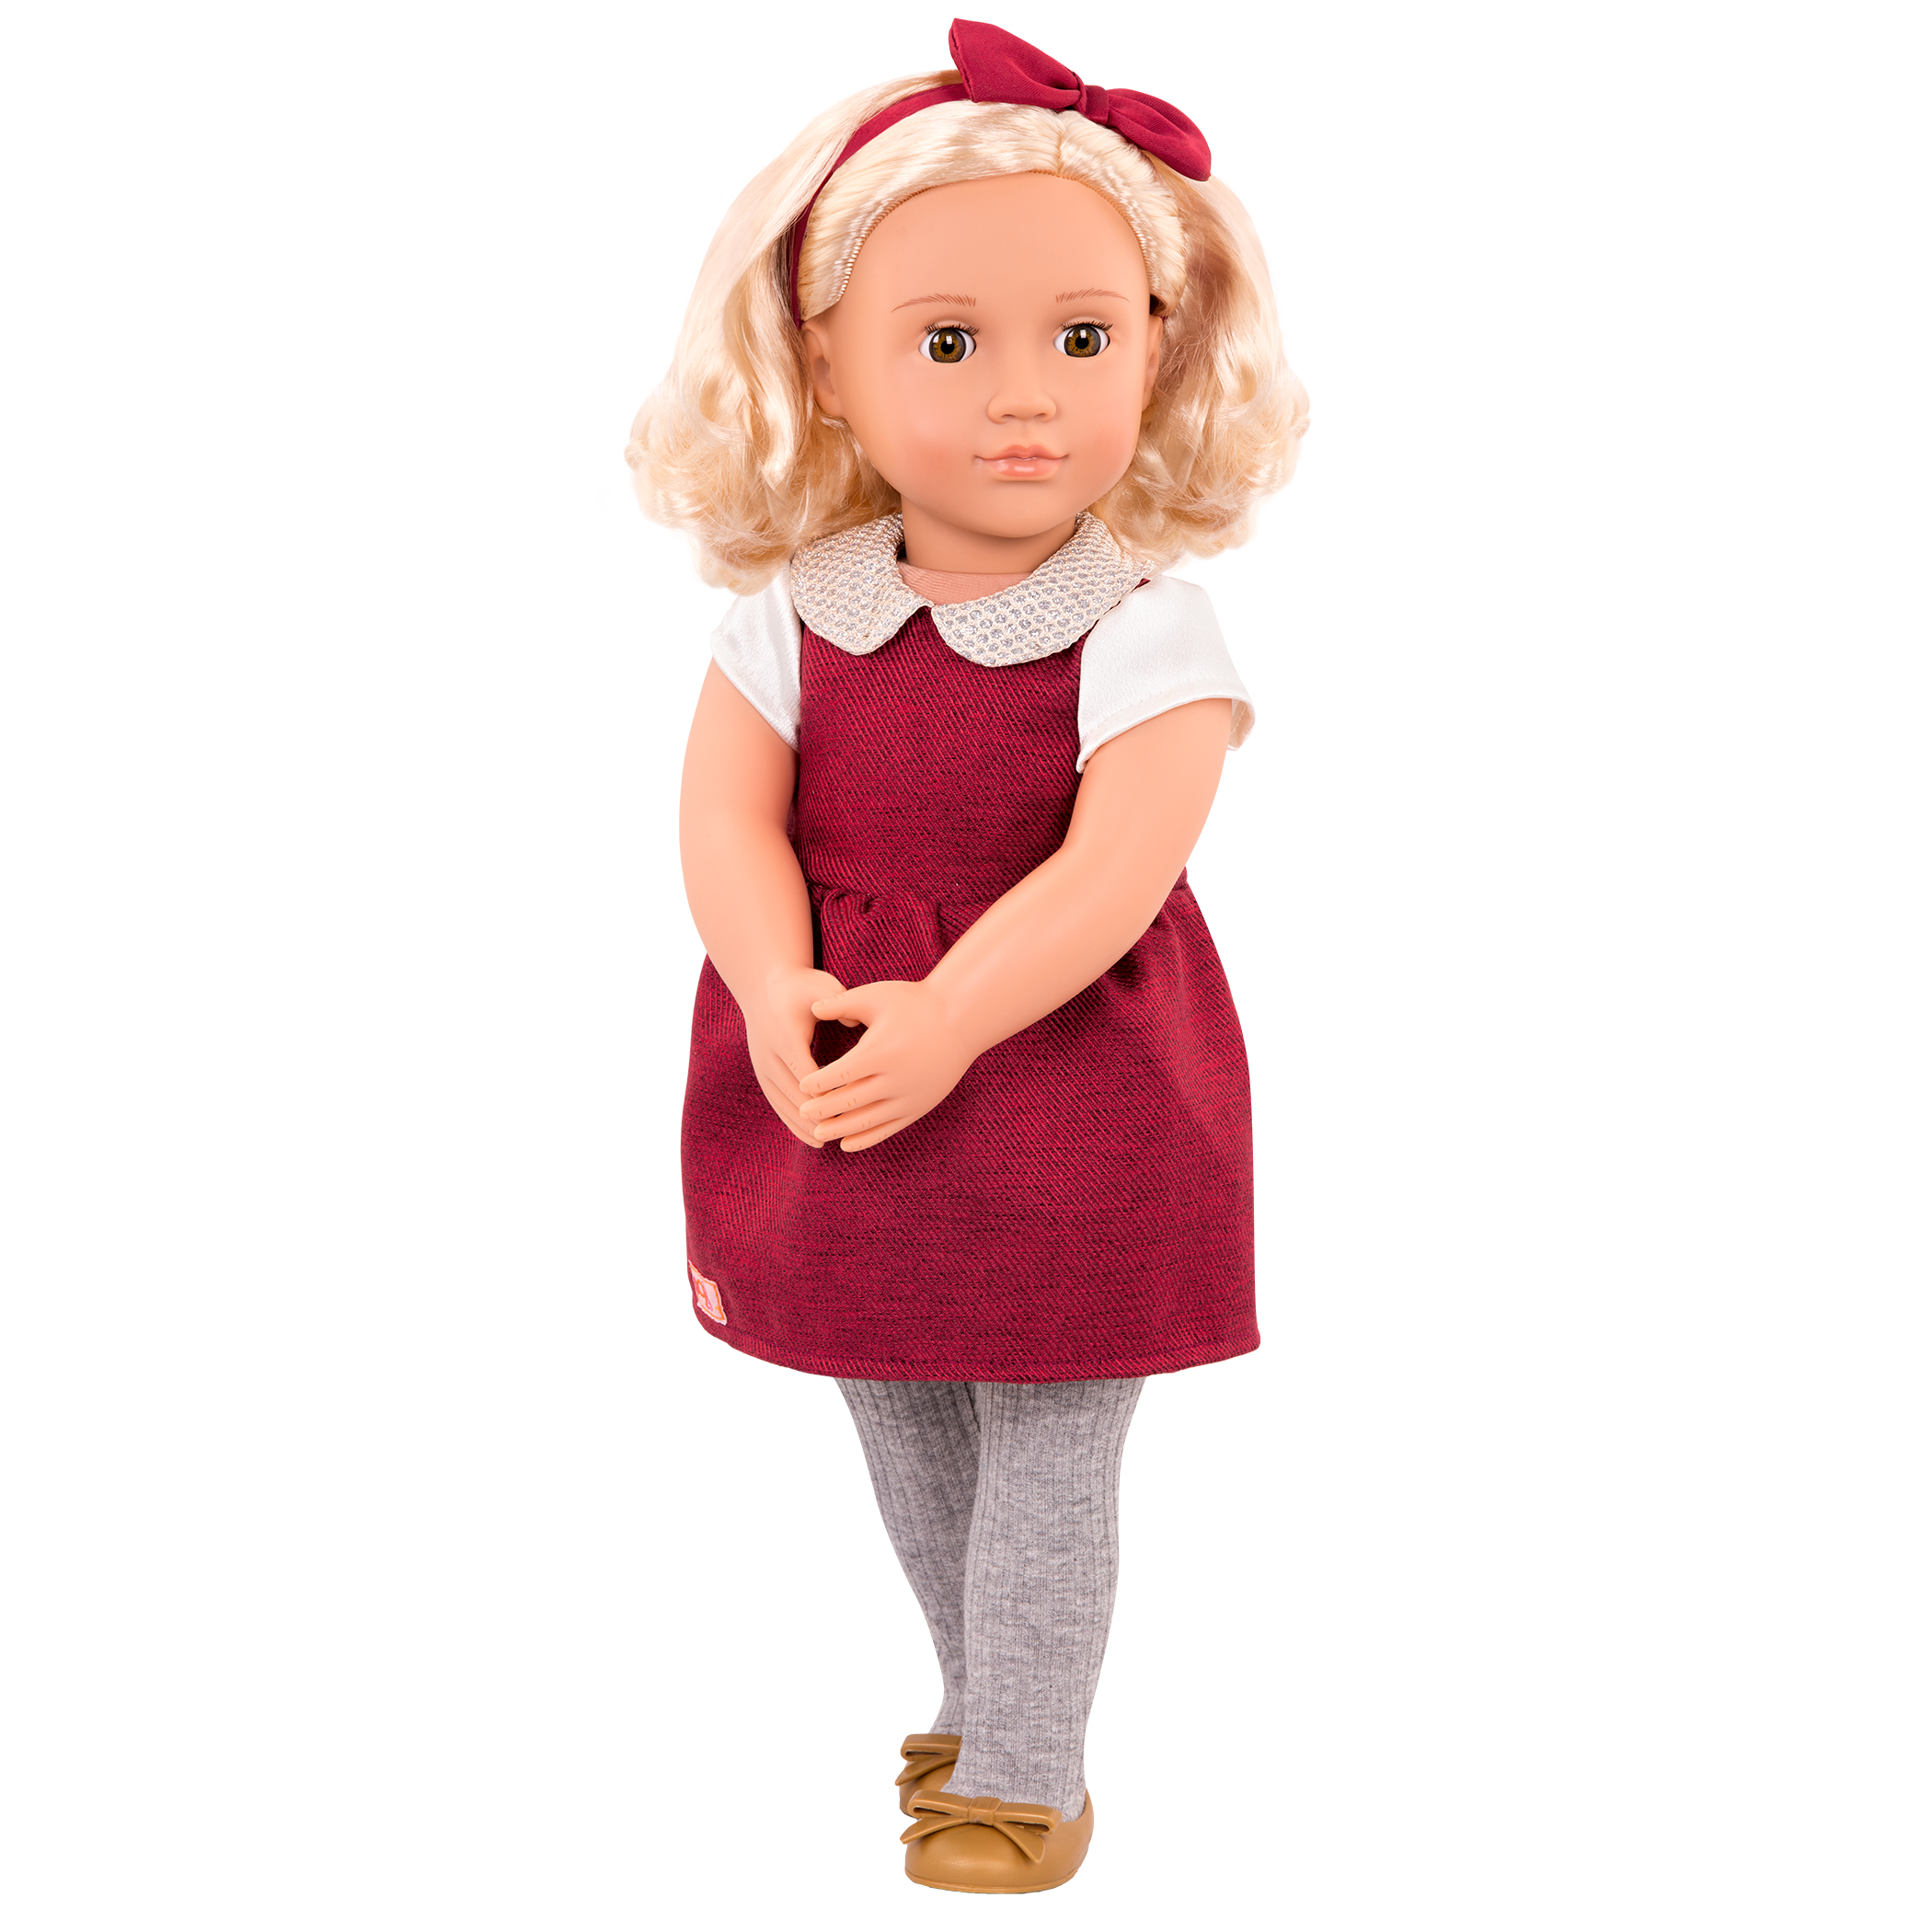 18-inch holiday doll with blonde hair and hazel eyes